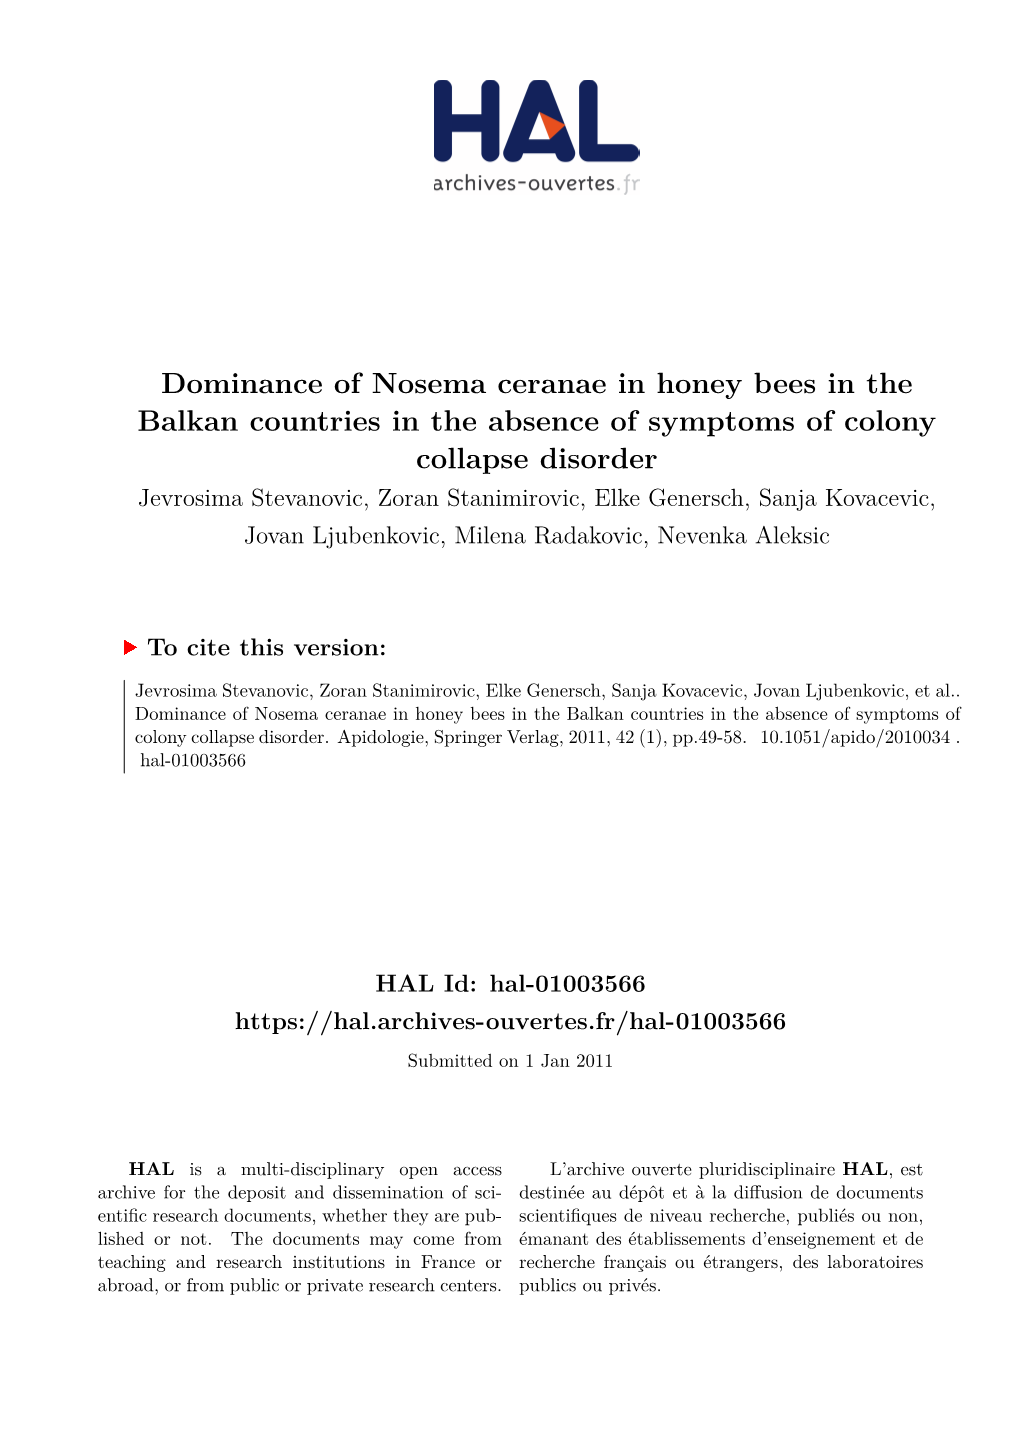 Dominance of Nosema Ceranae in Honey Bees in the Balkan Countries